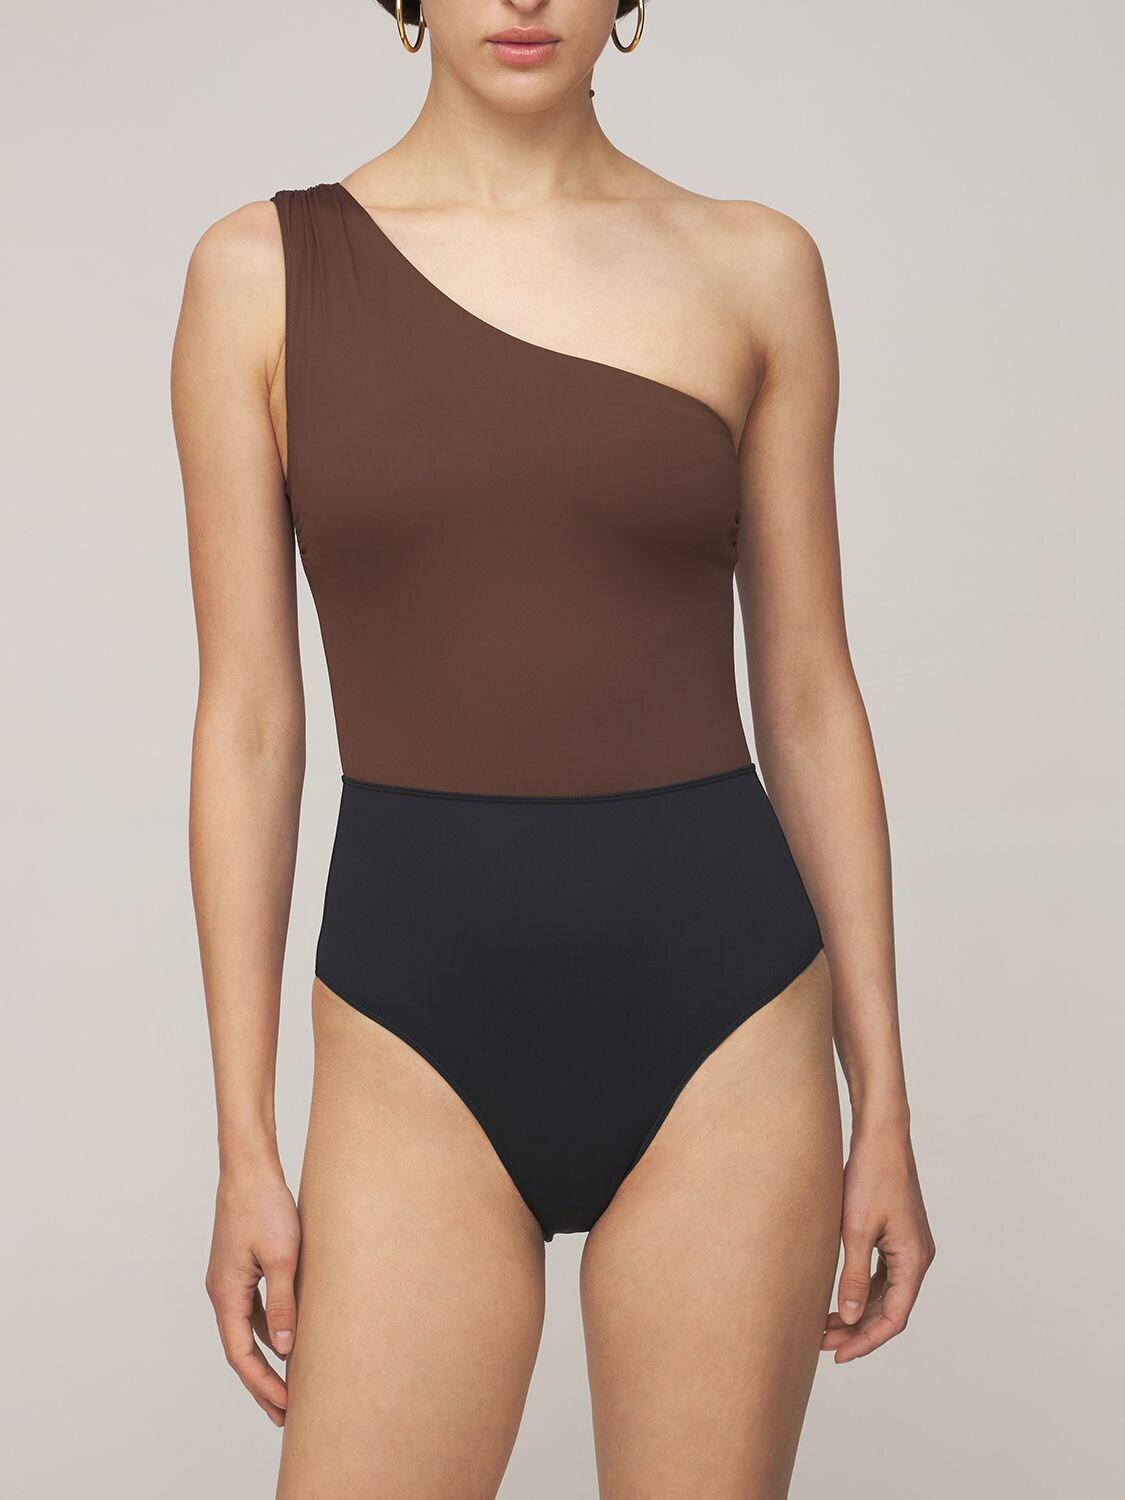 Max Mara One Shoulder One Piece Swimsuit in Brown | Lyst